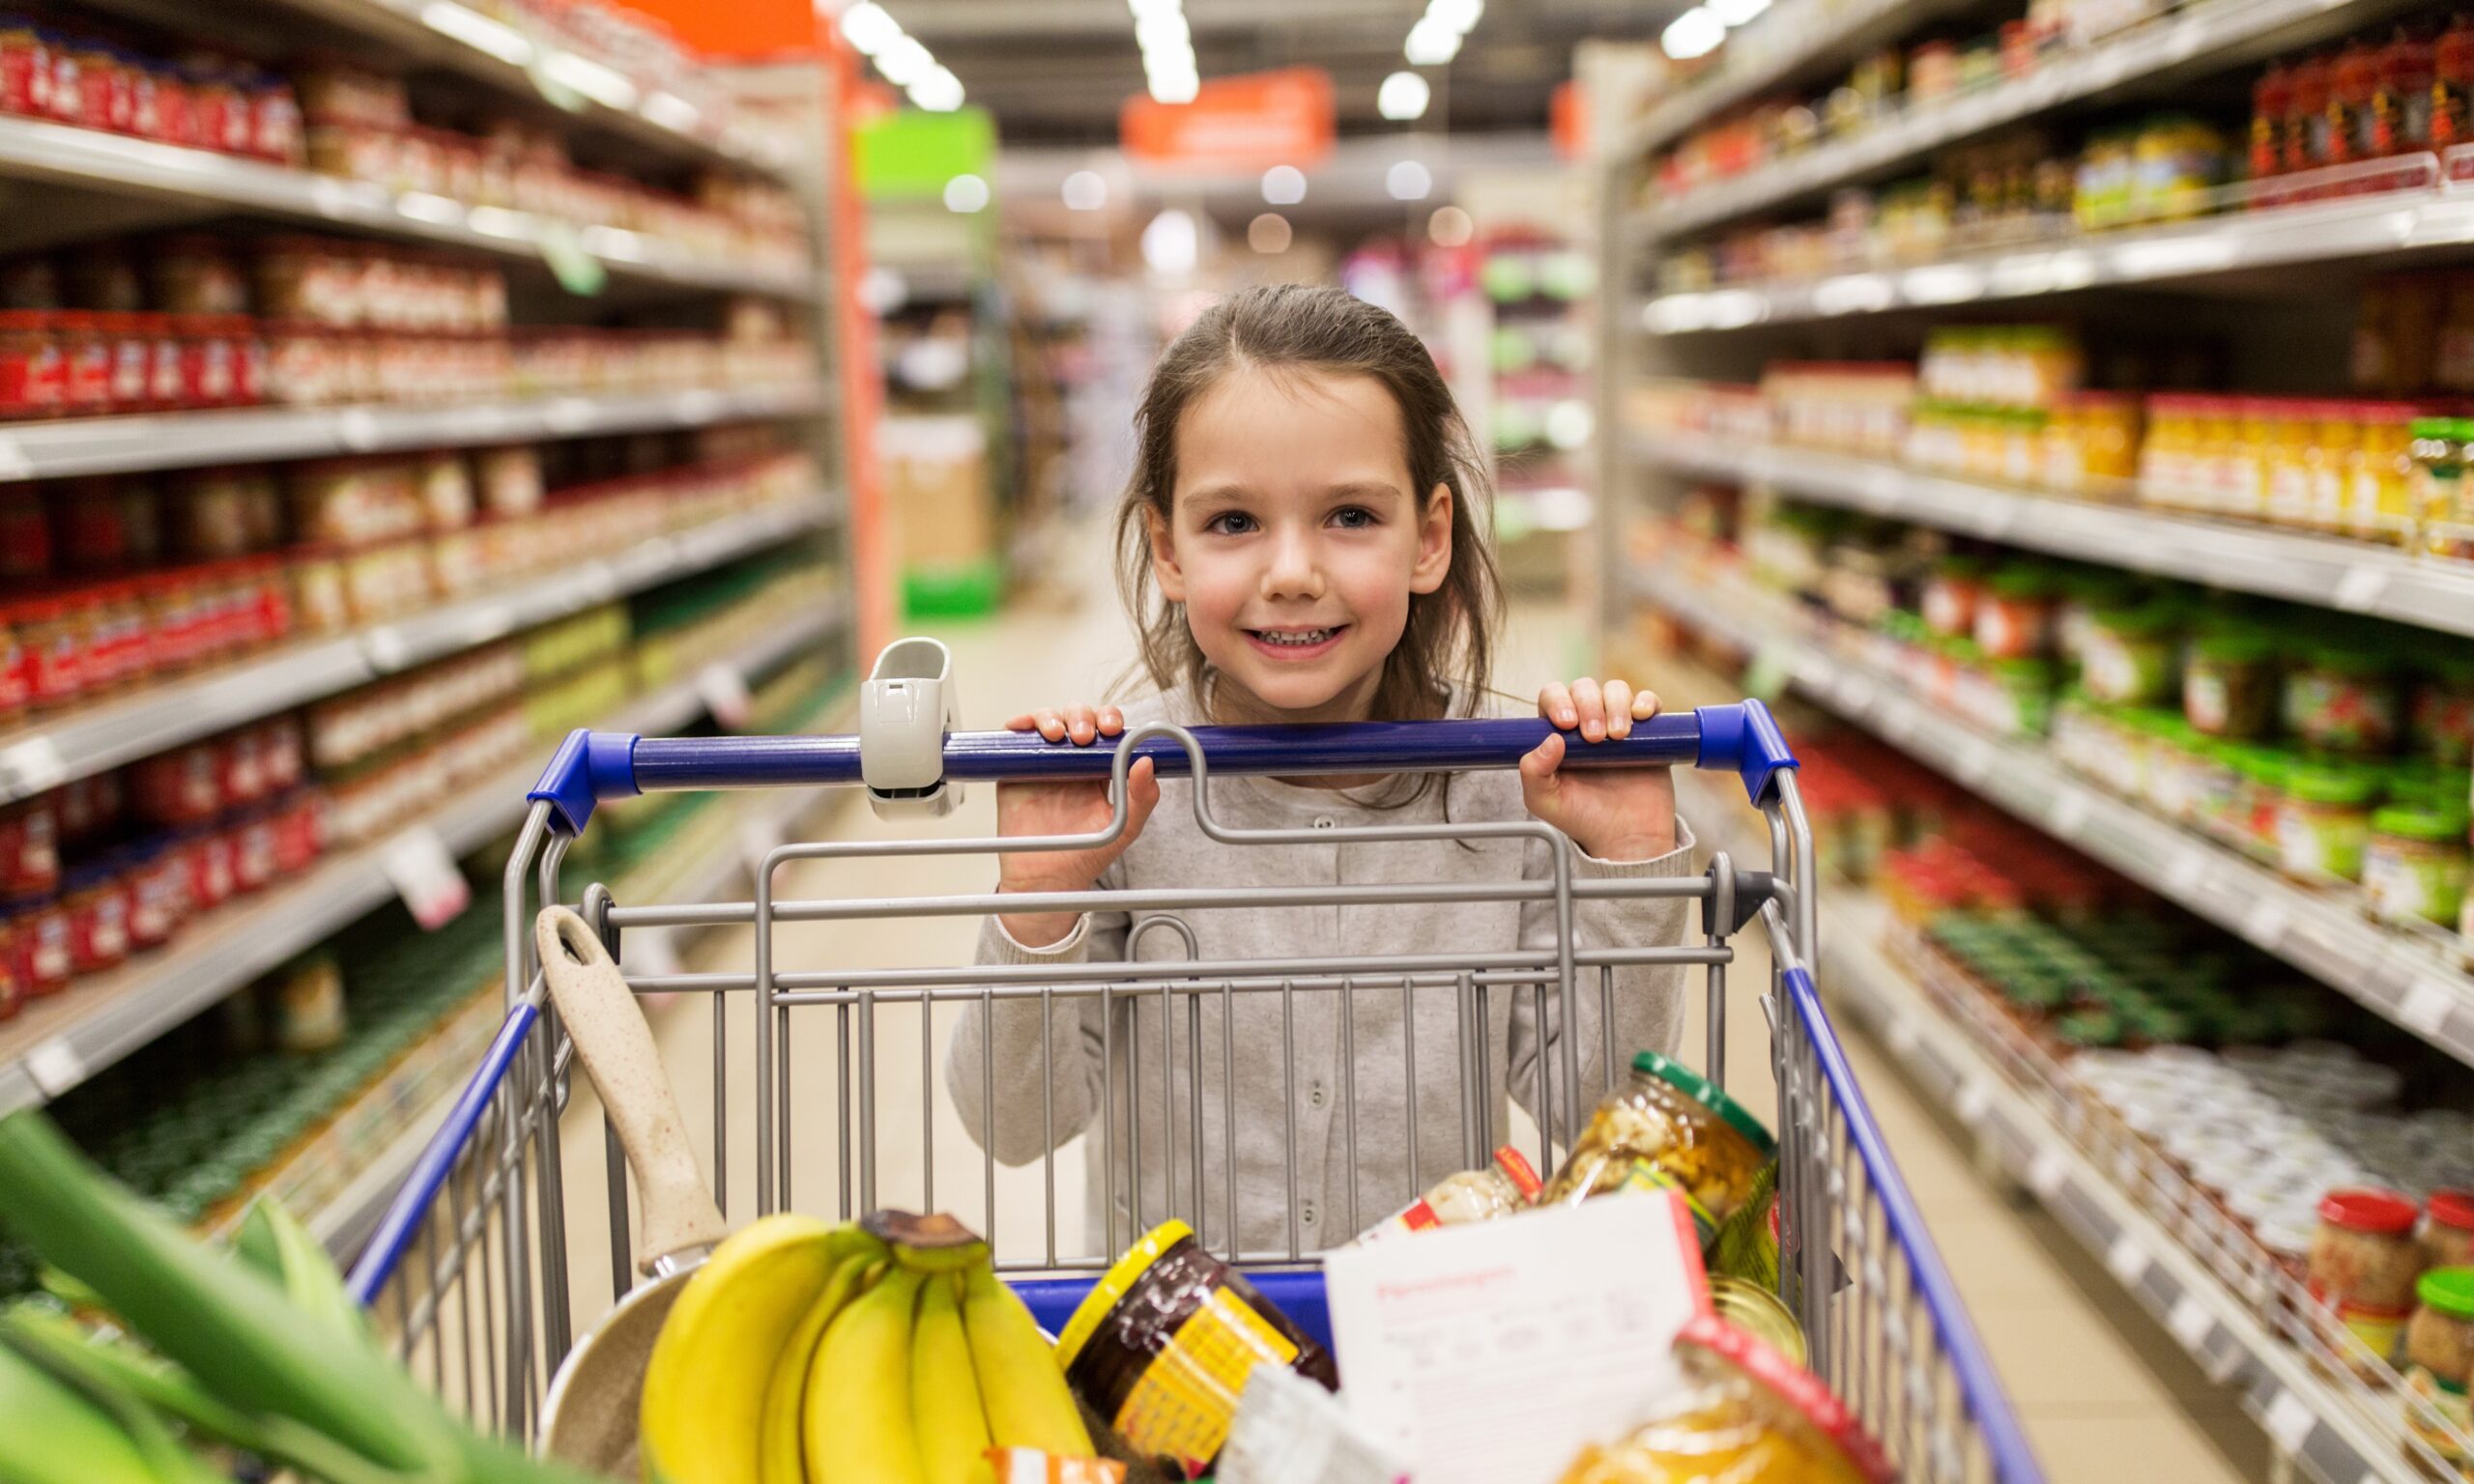 A young girl pushes a shopping cart full of groceries, including bananas and some jars, in a grocery store aisle that's slightly blurred behind her.